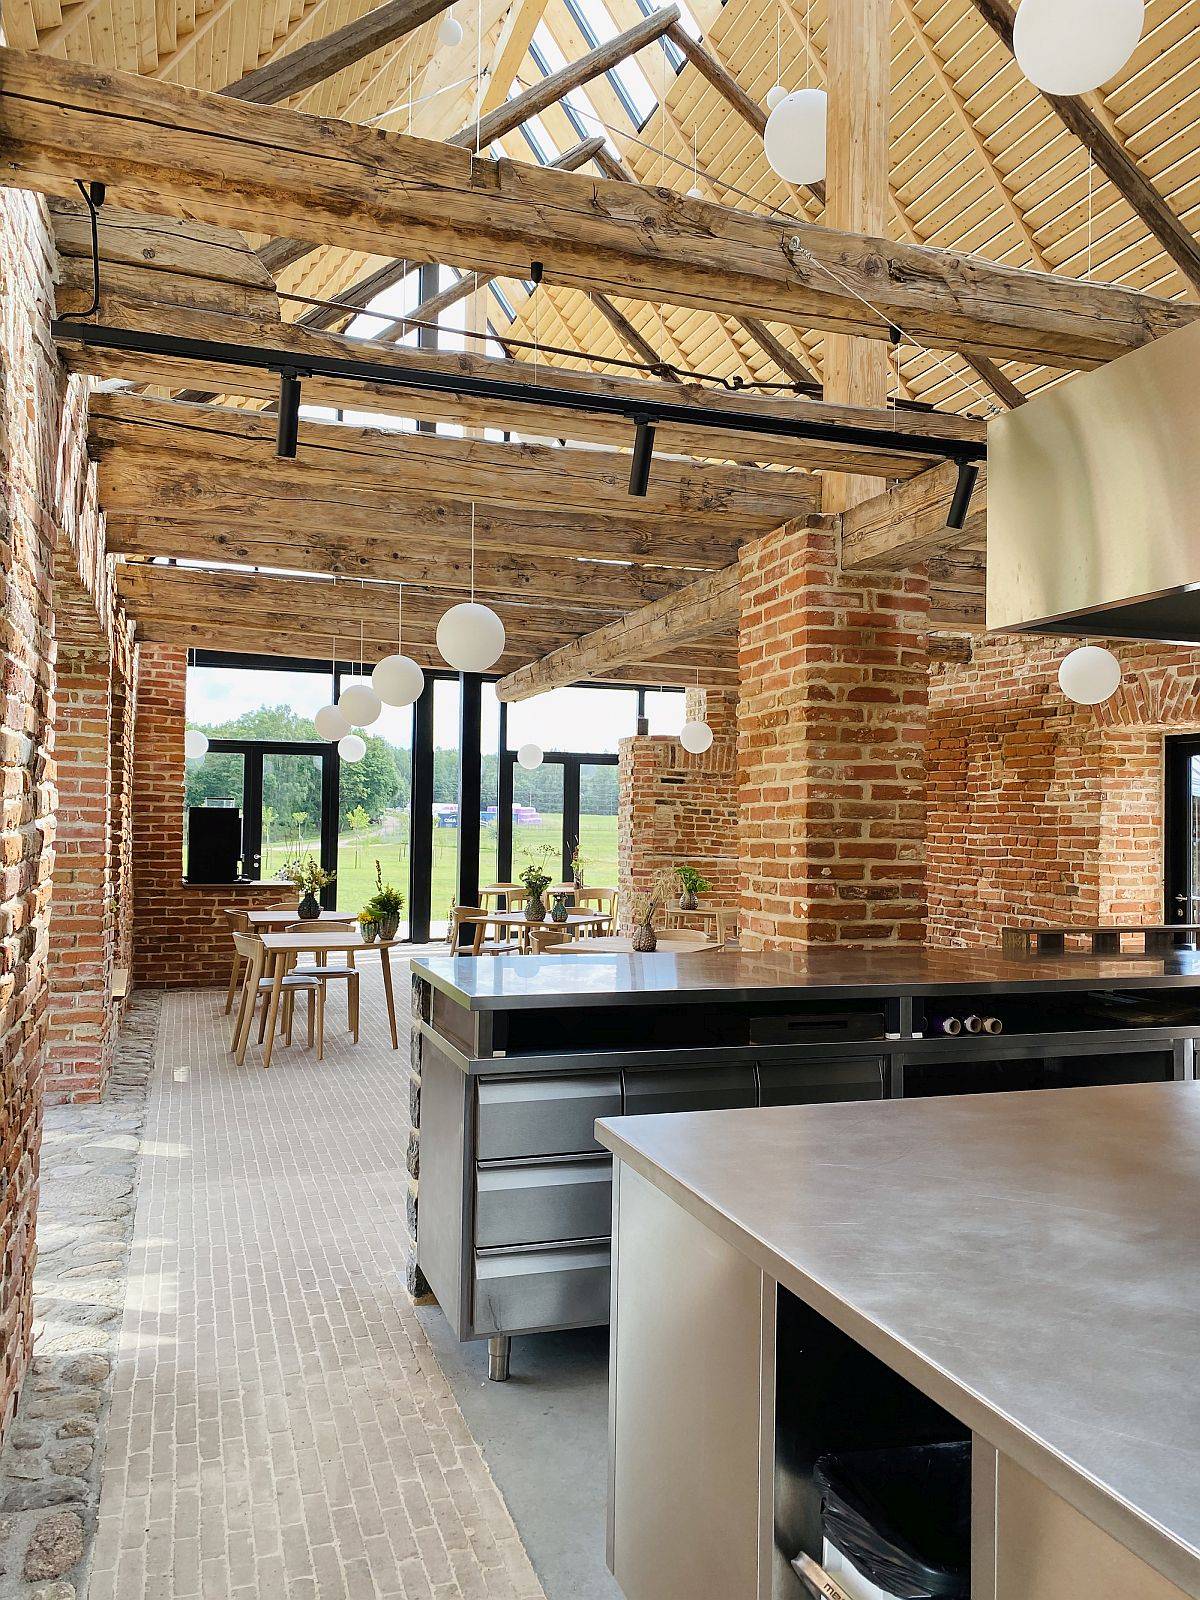 Kitchen and dining area of the interior with brick walls and rustic-industrial design